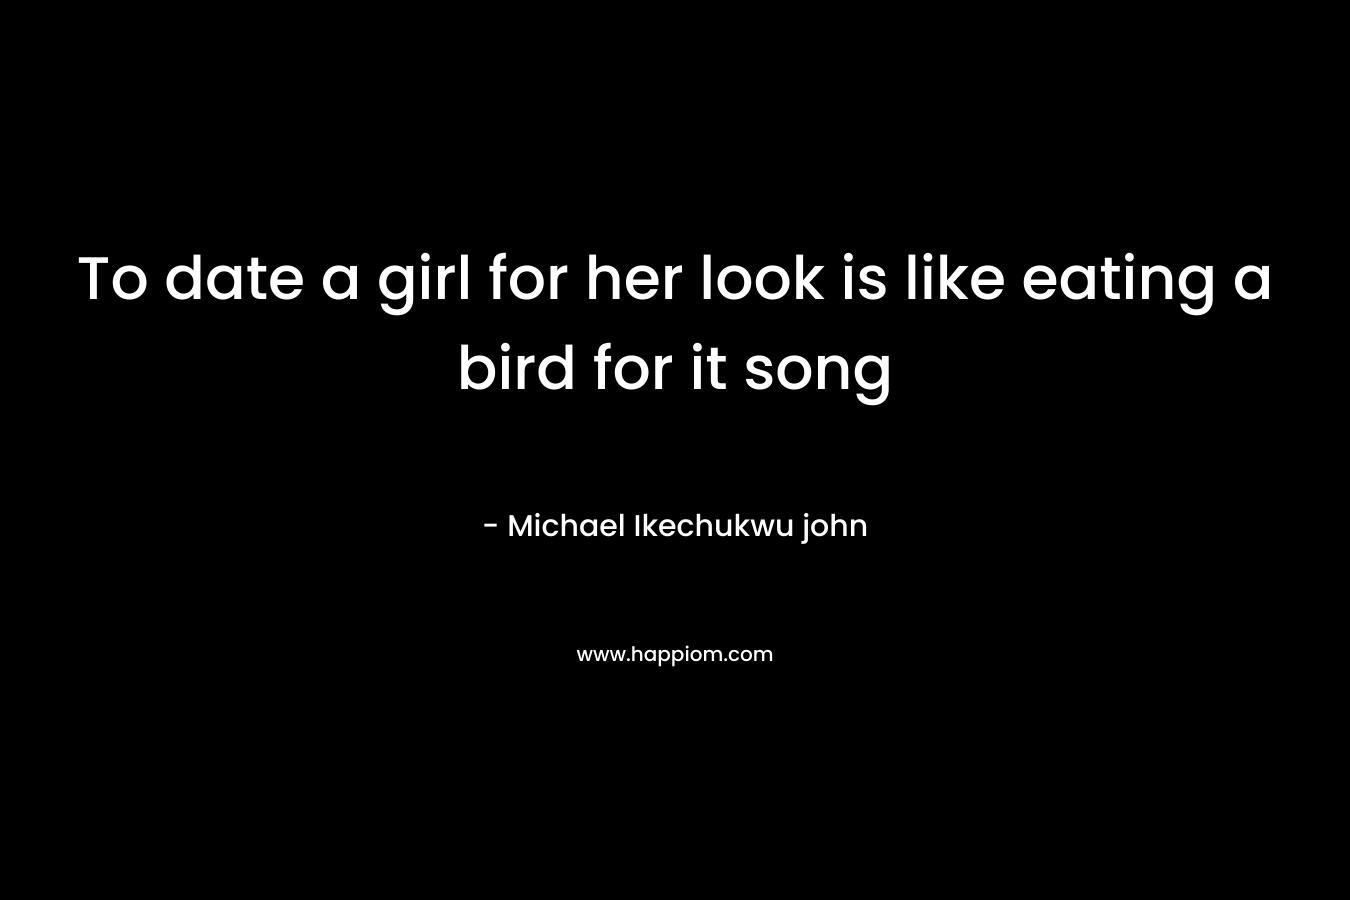 To date a girl for her look is like eating a bird for it song – Michael Ikechukwu john